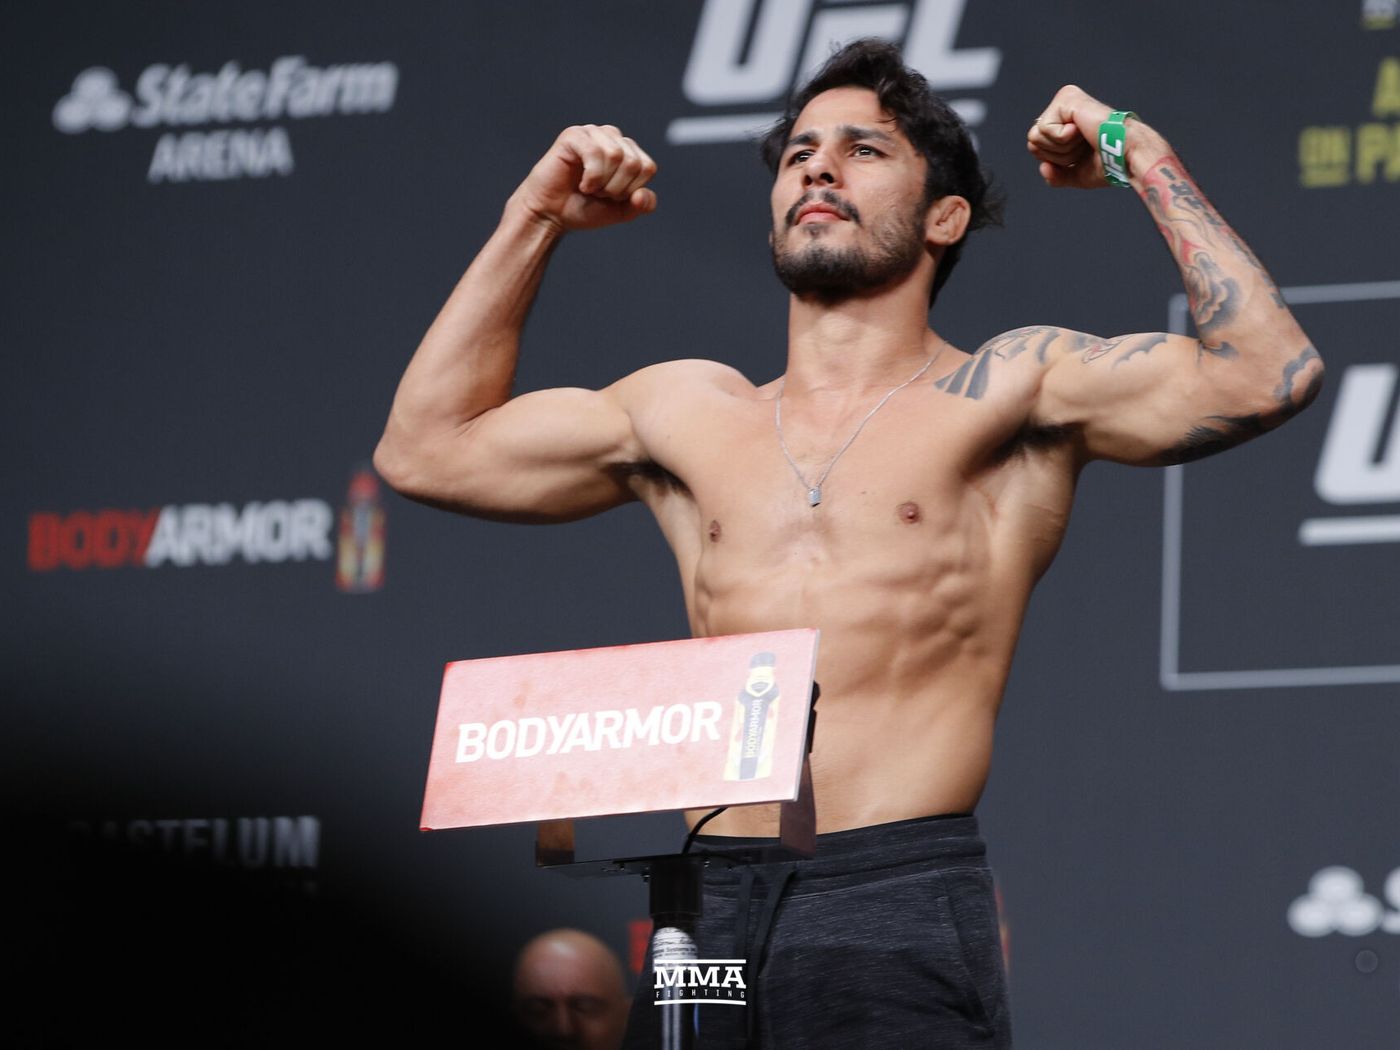 Pantoja to meet Schnell for UFC fight night in South Korea on Dec 21st.